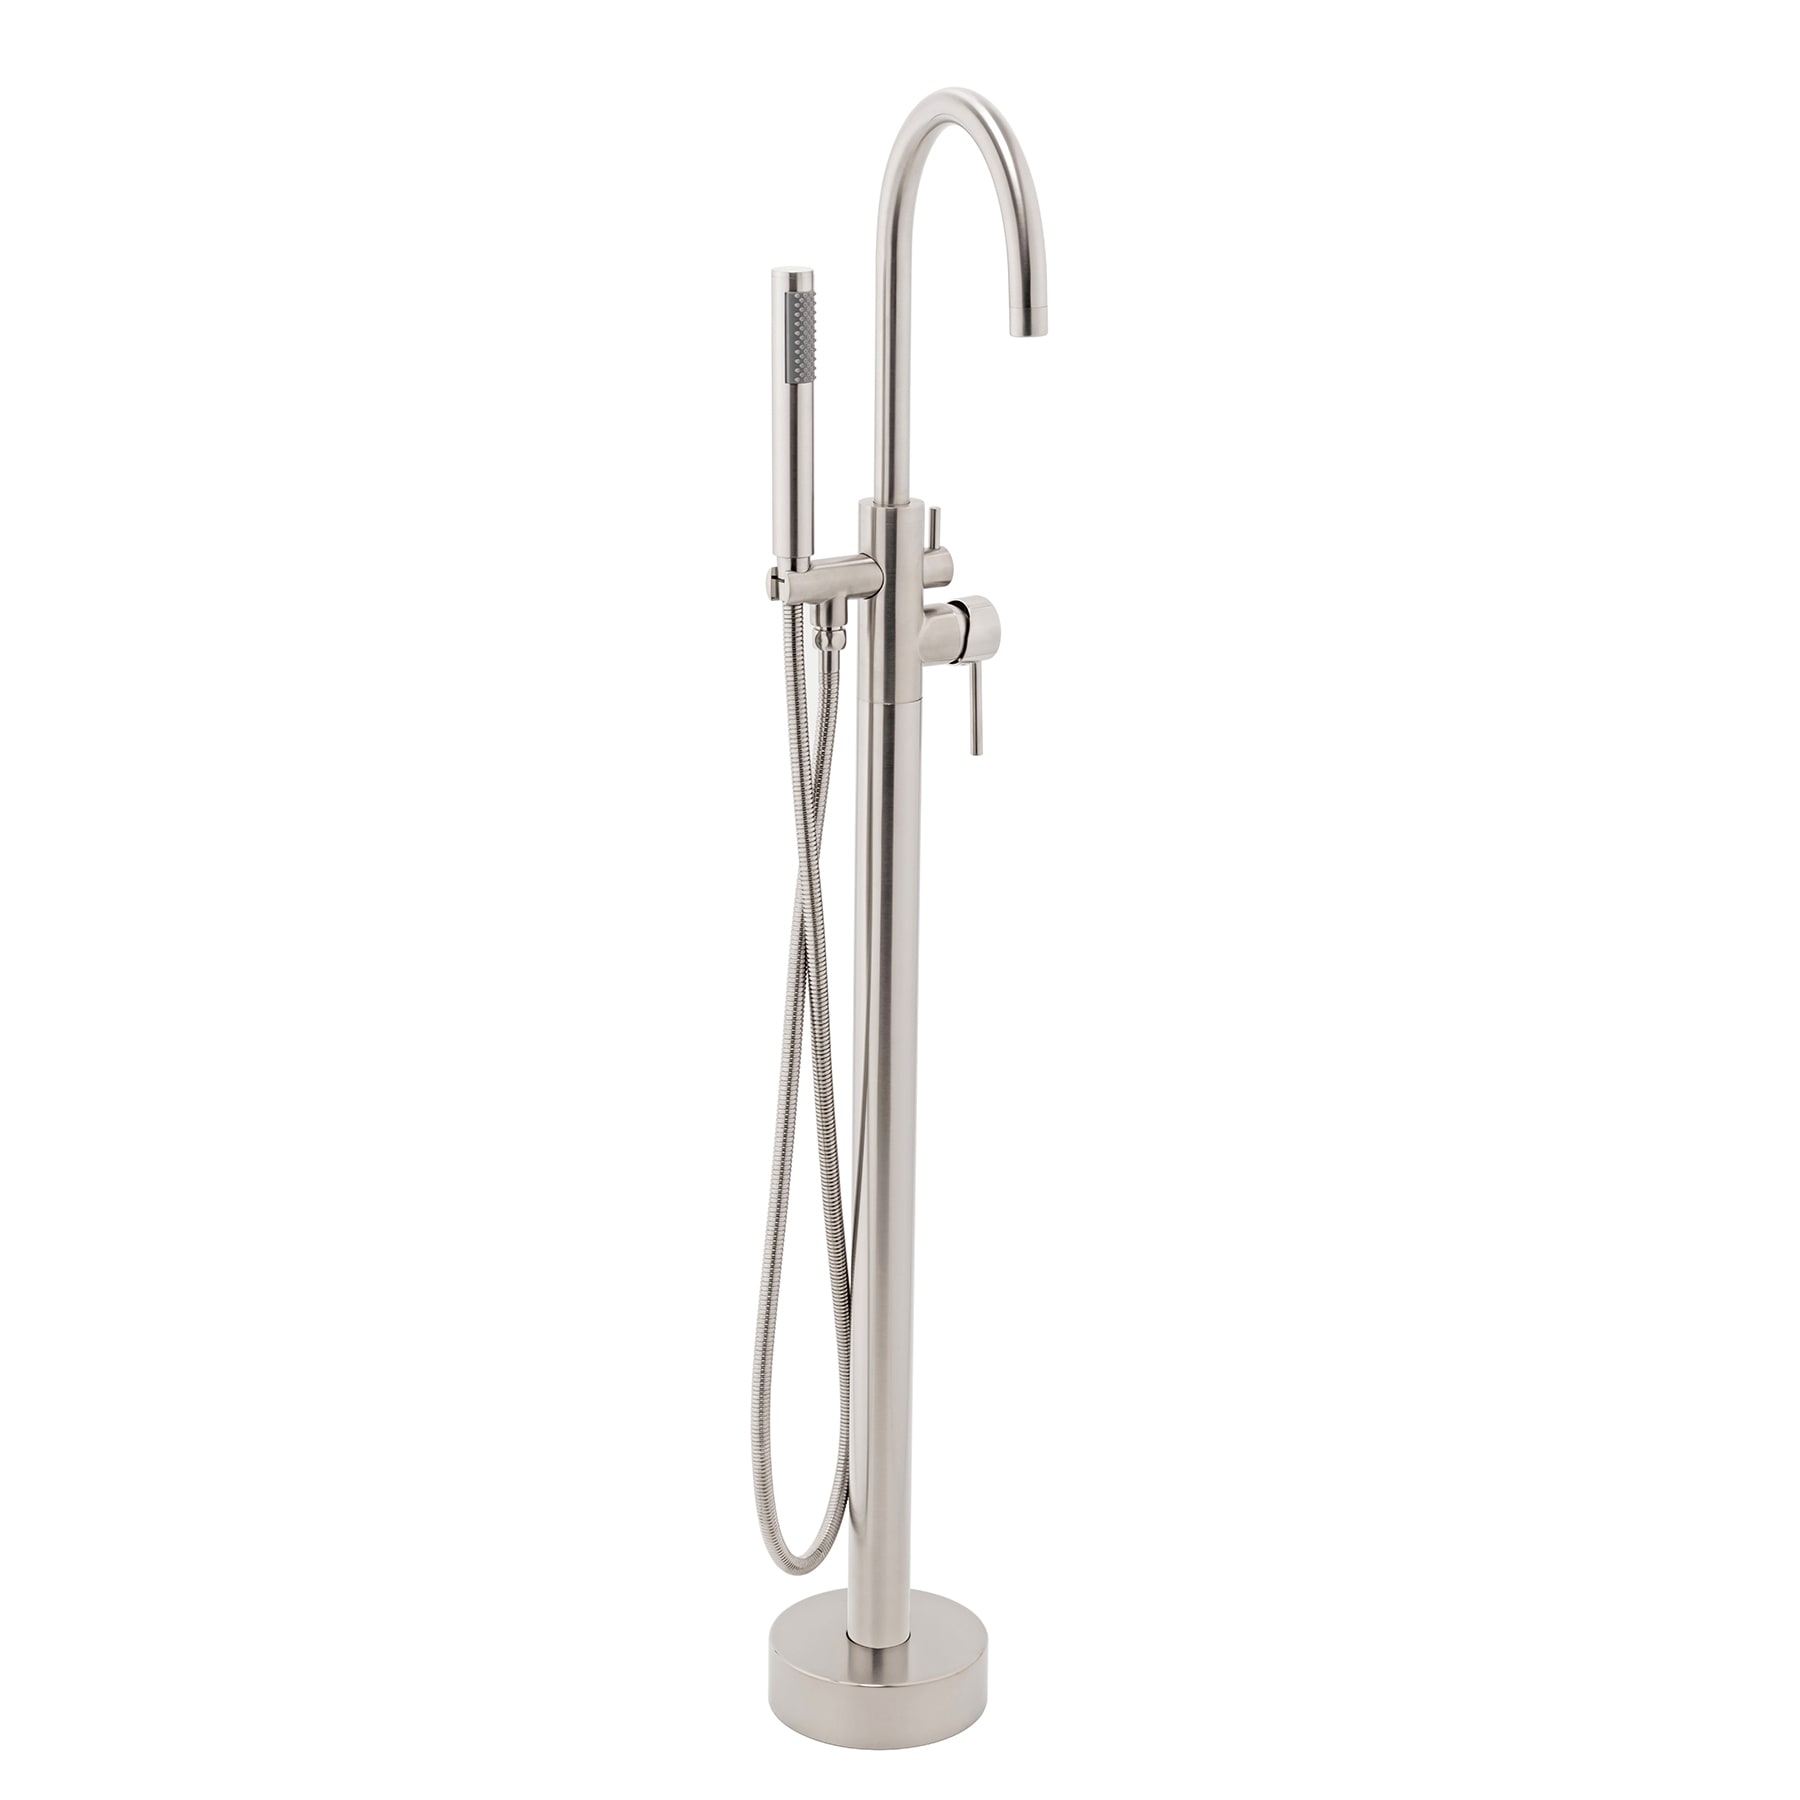 Brushed Nickel Bathroom Tub Faucet Free Standing Tub Filler Mixer W/Hand Shower 